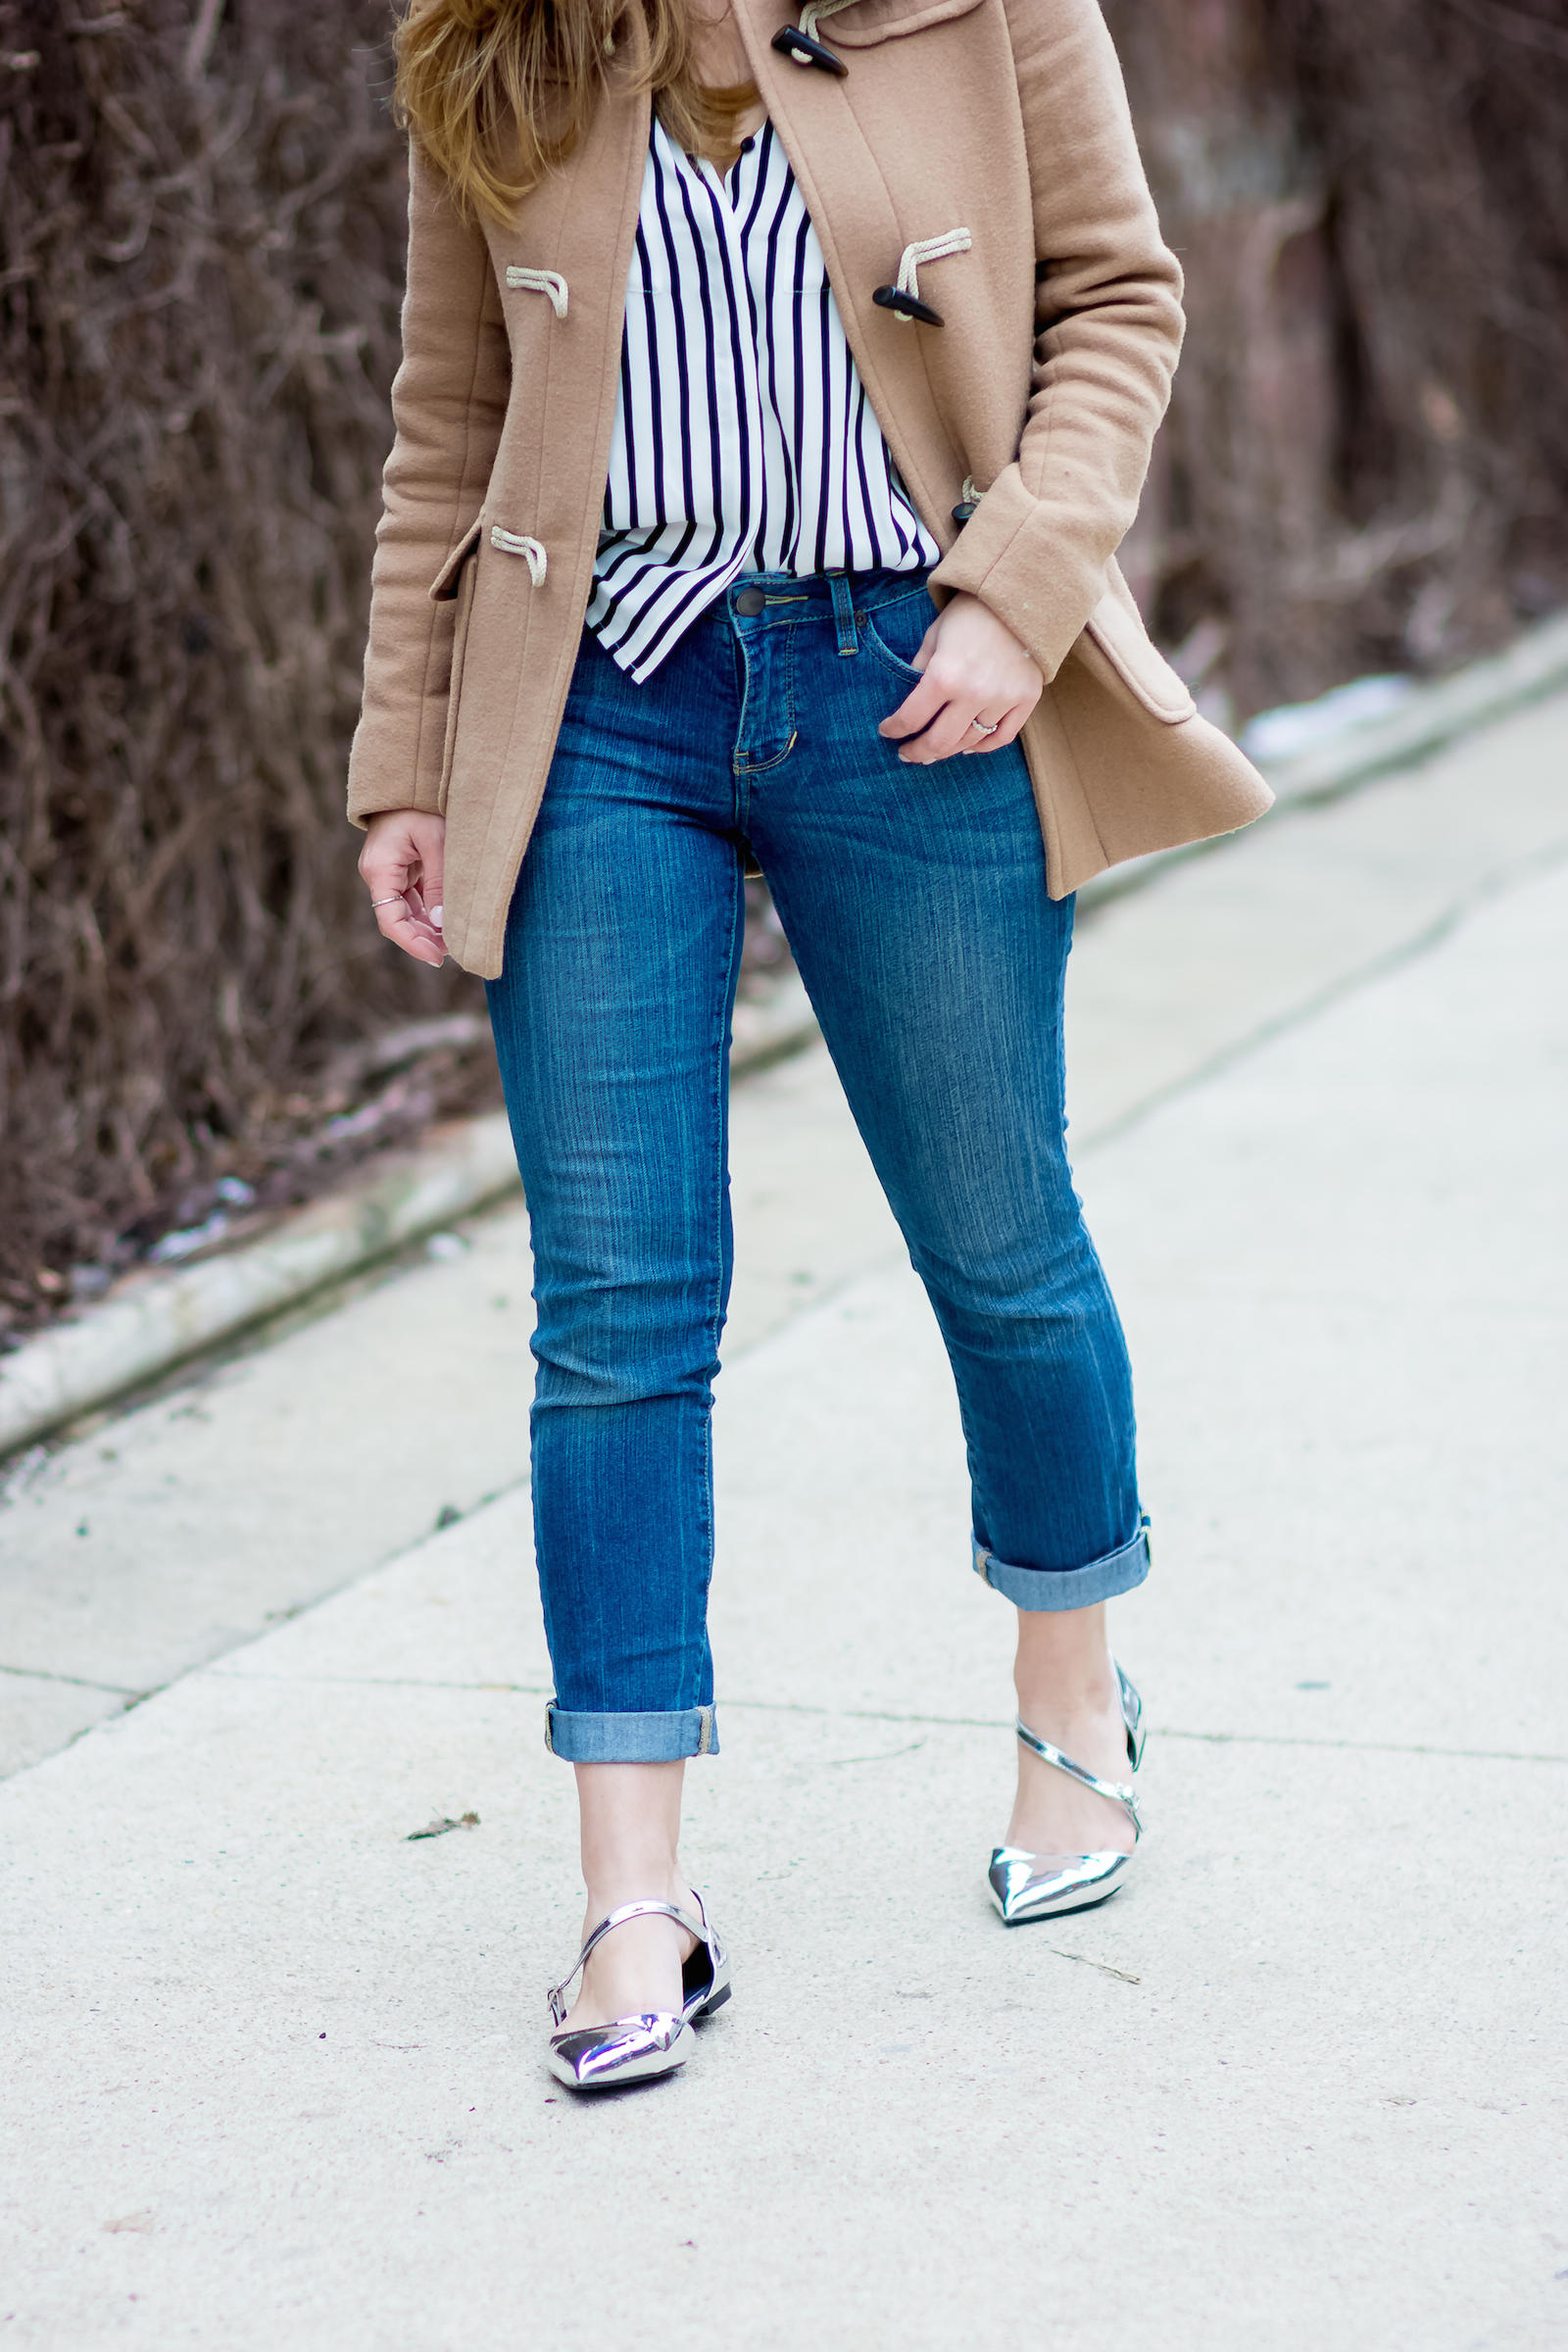 Stripe Silver Spring Outfit Chicago Blogger